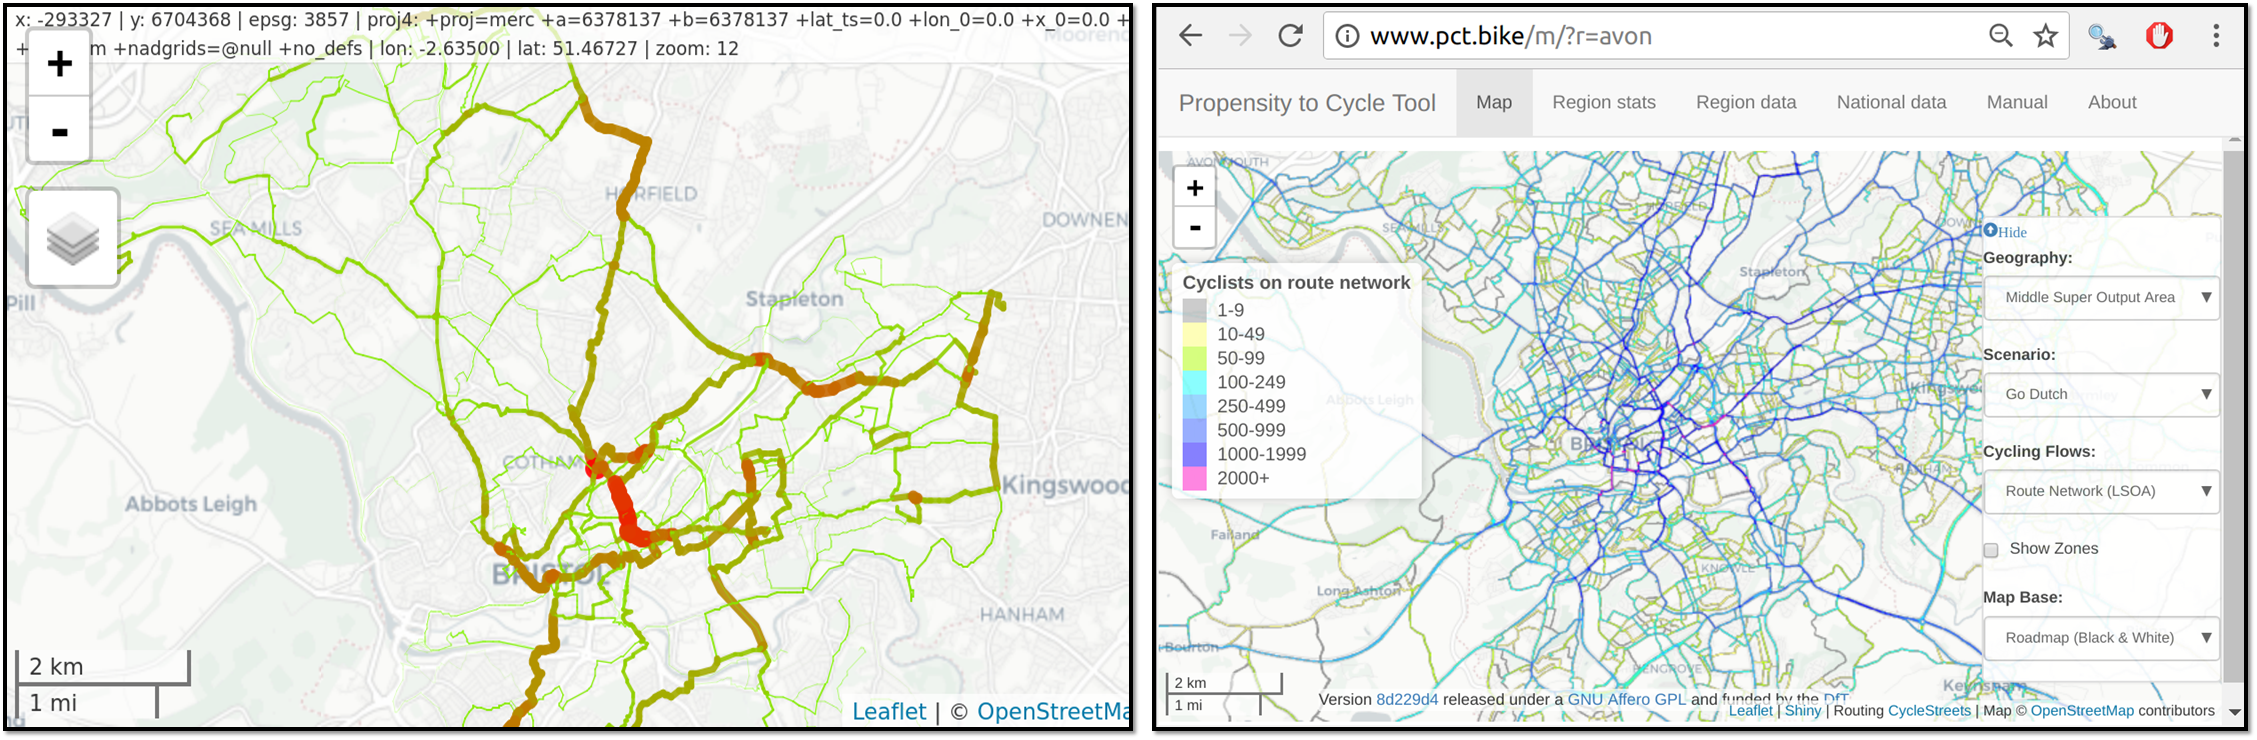 Estimated cycling potential on the route network in Bristol.